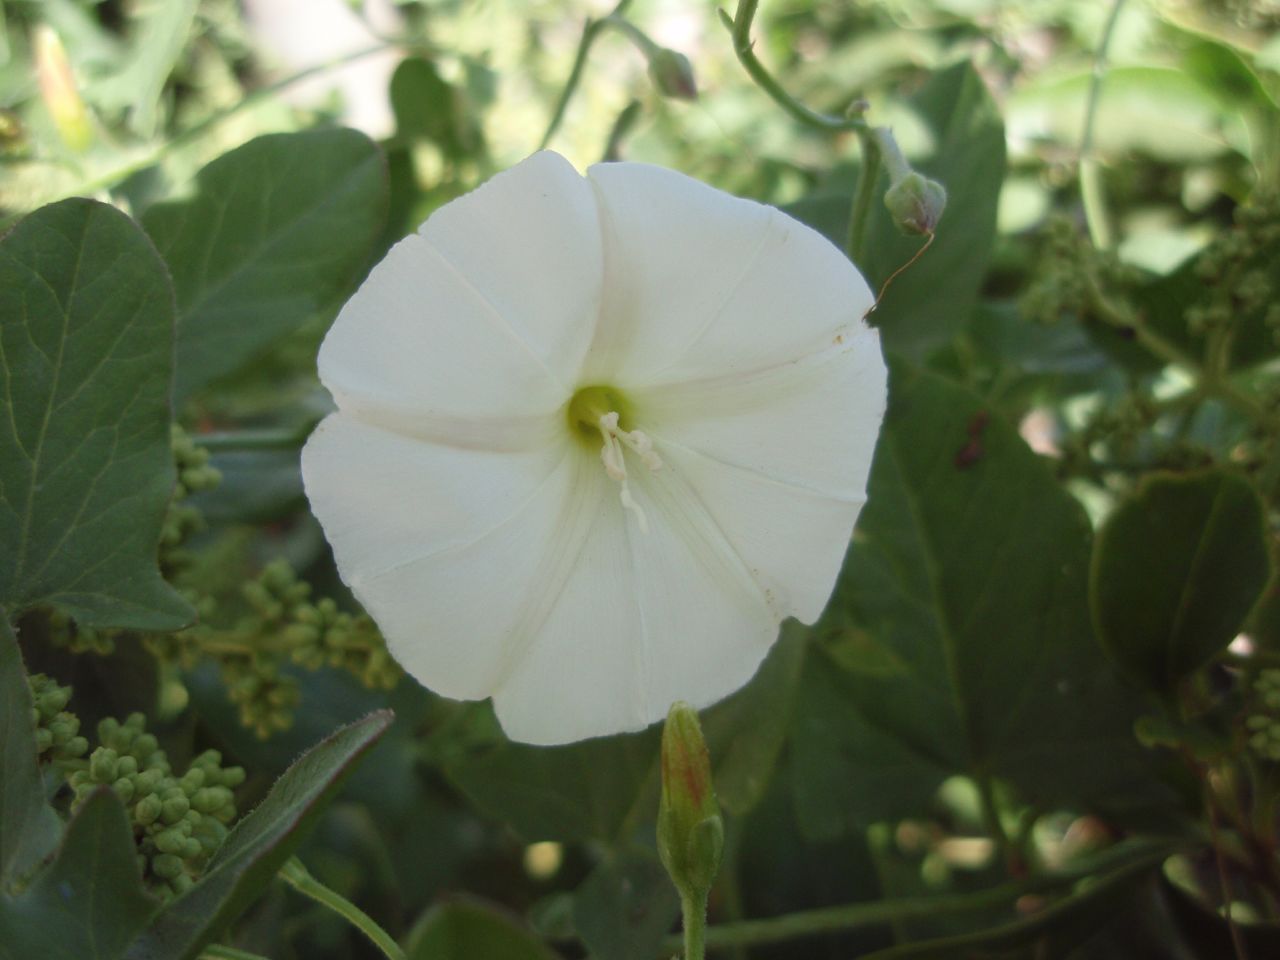 the large flower is standing alone among the green leaves